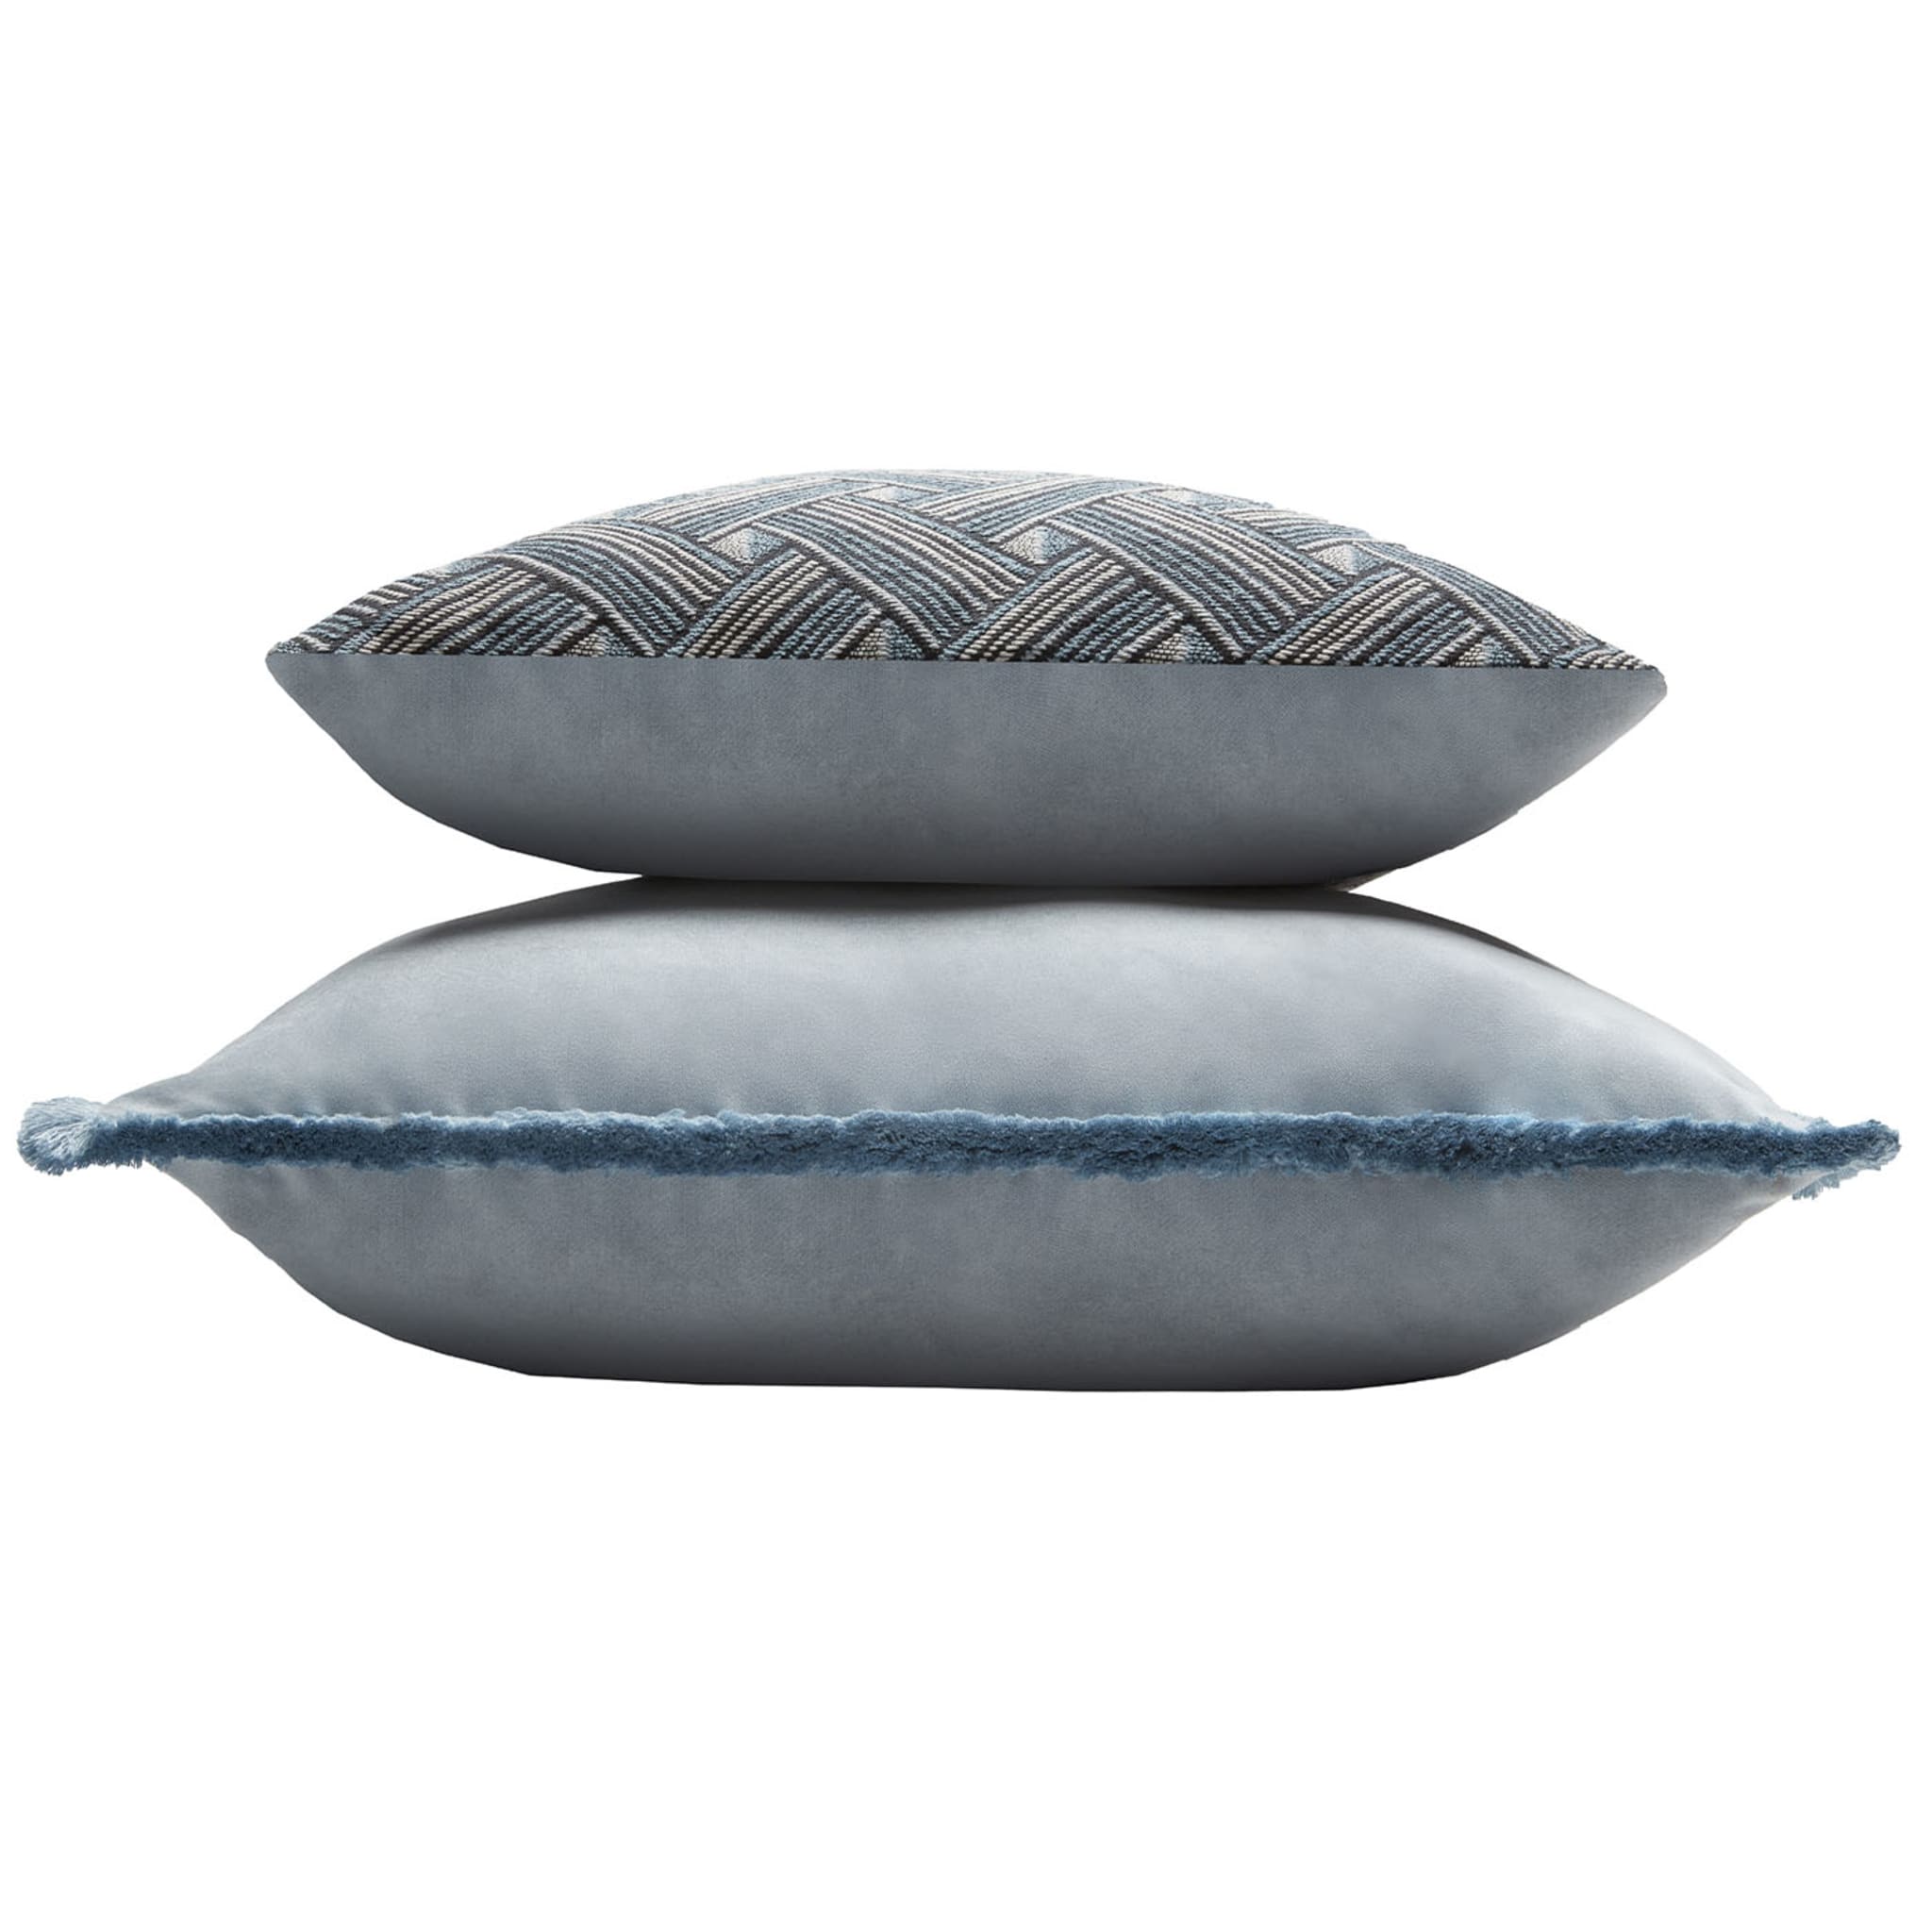 Rock Collection Teal Cushion - Alternative view 2